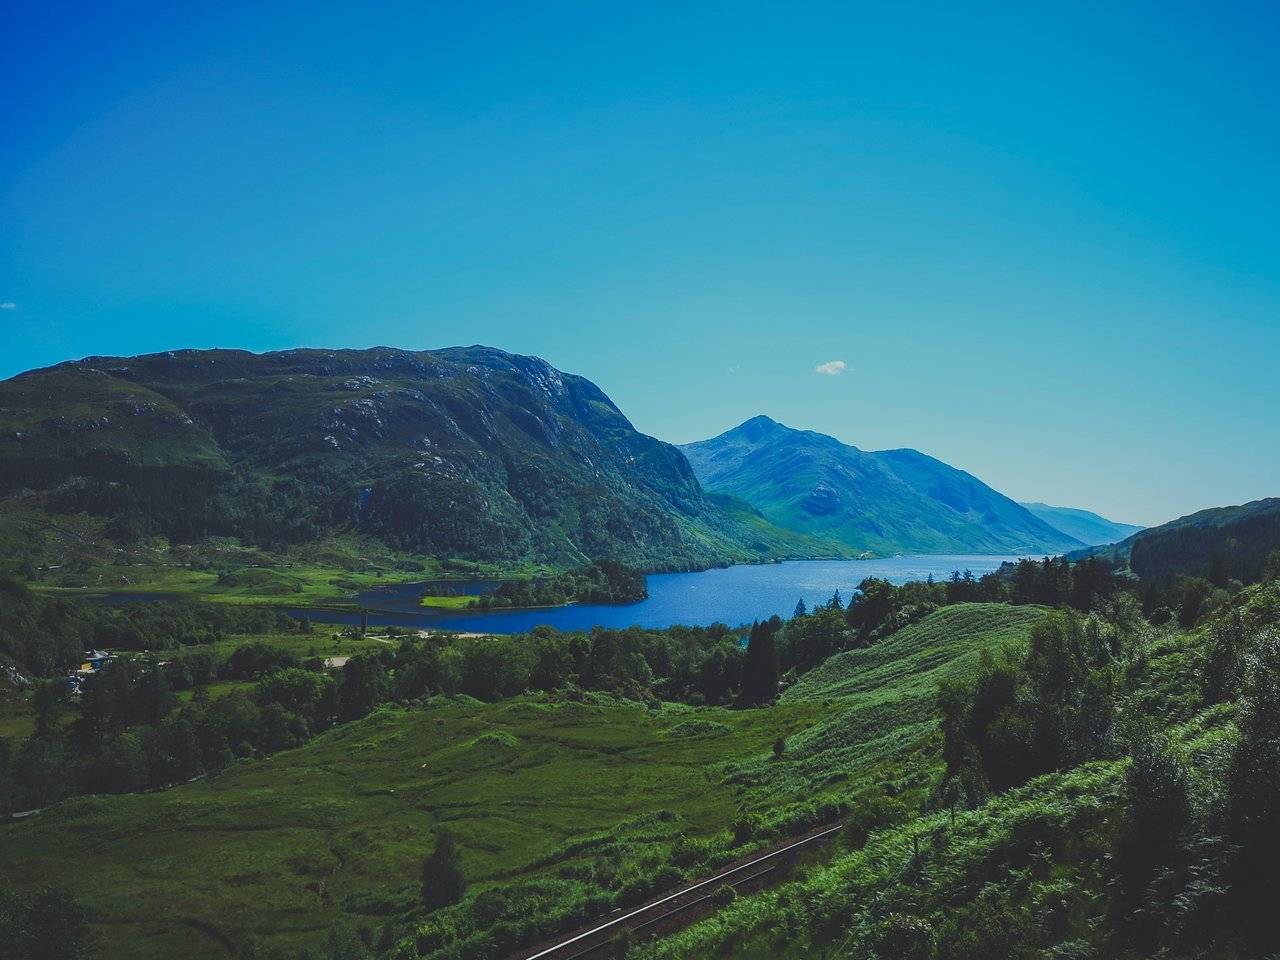   Loch Shiel view from Glenfinnan Viaduct Trail, Scotland. Photo by Alis Monte [CC BY-SA 4.0], via Connecting the Dots